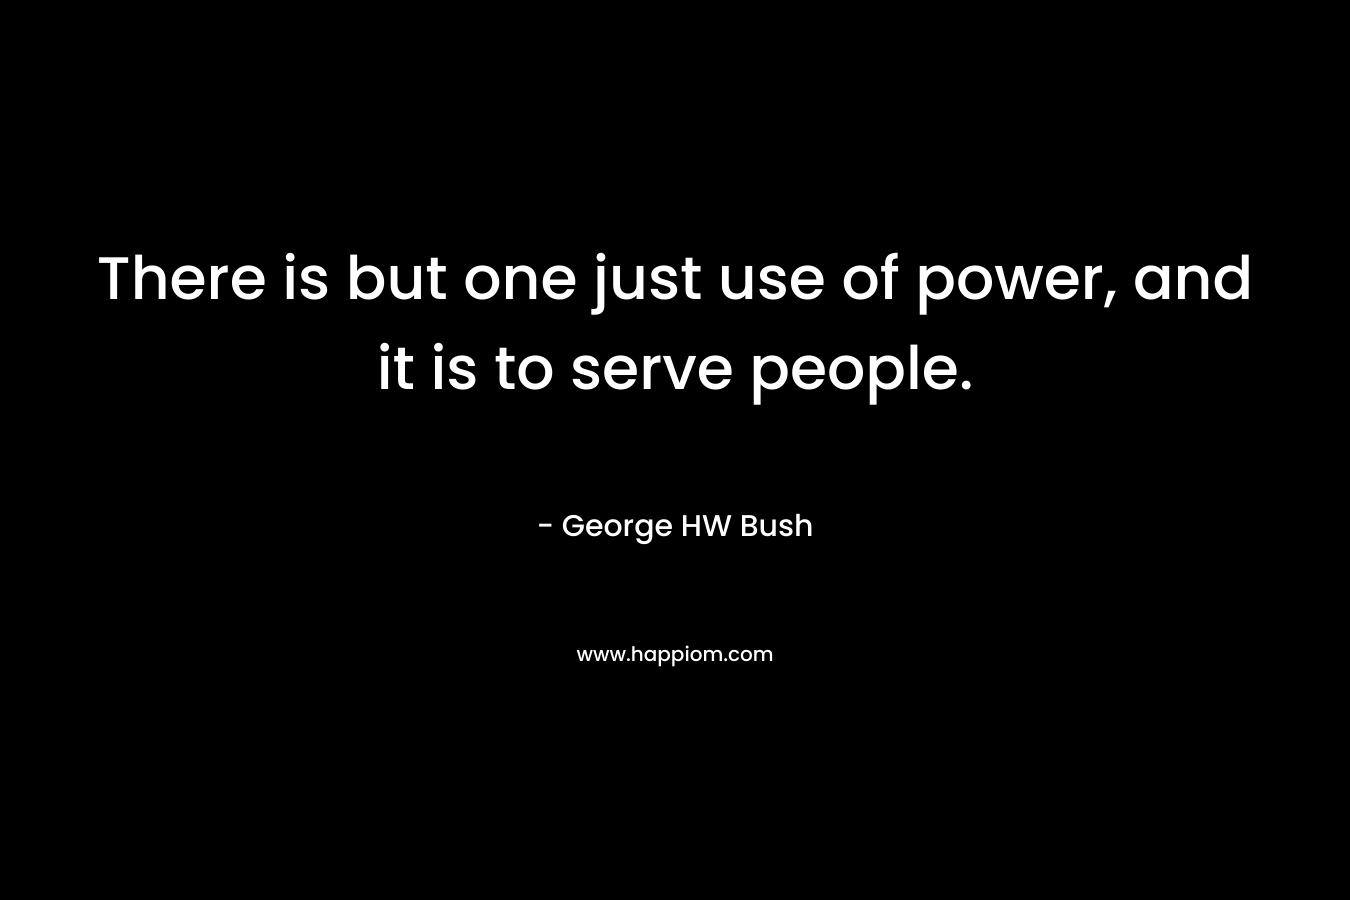 There is but one just use of power, and it is to serve people. – George HW Bush